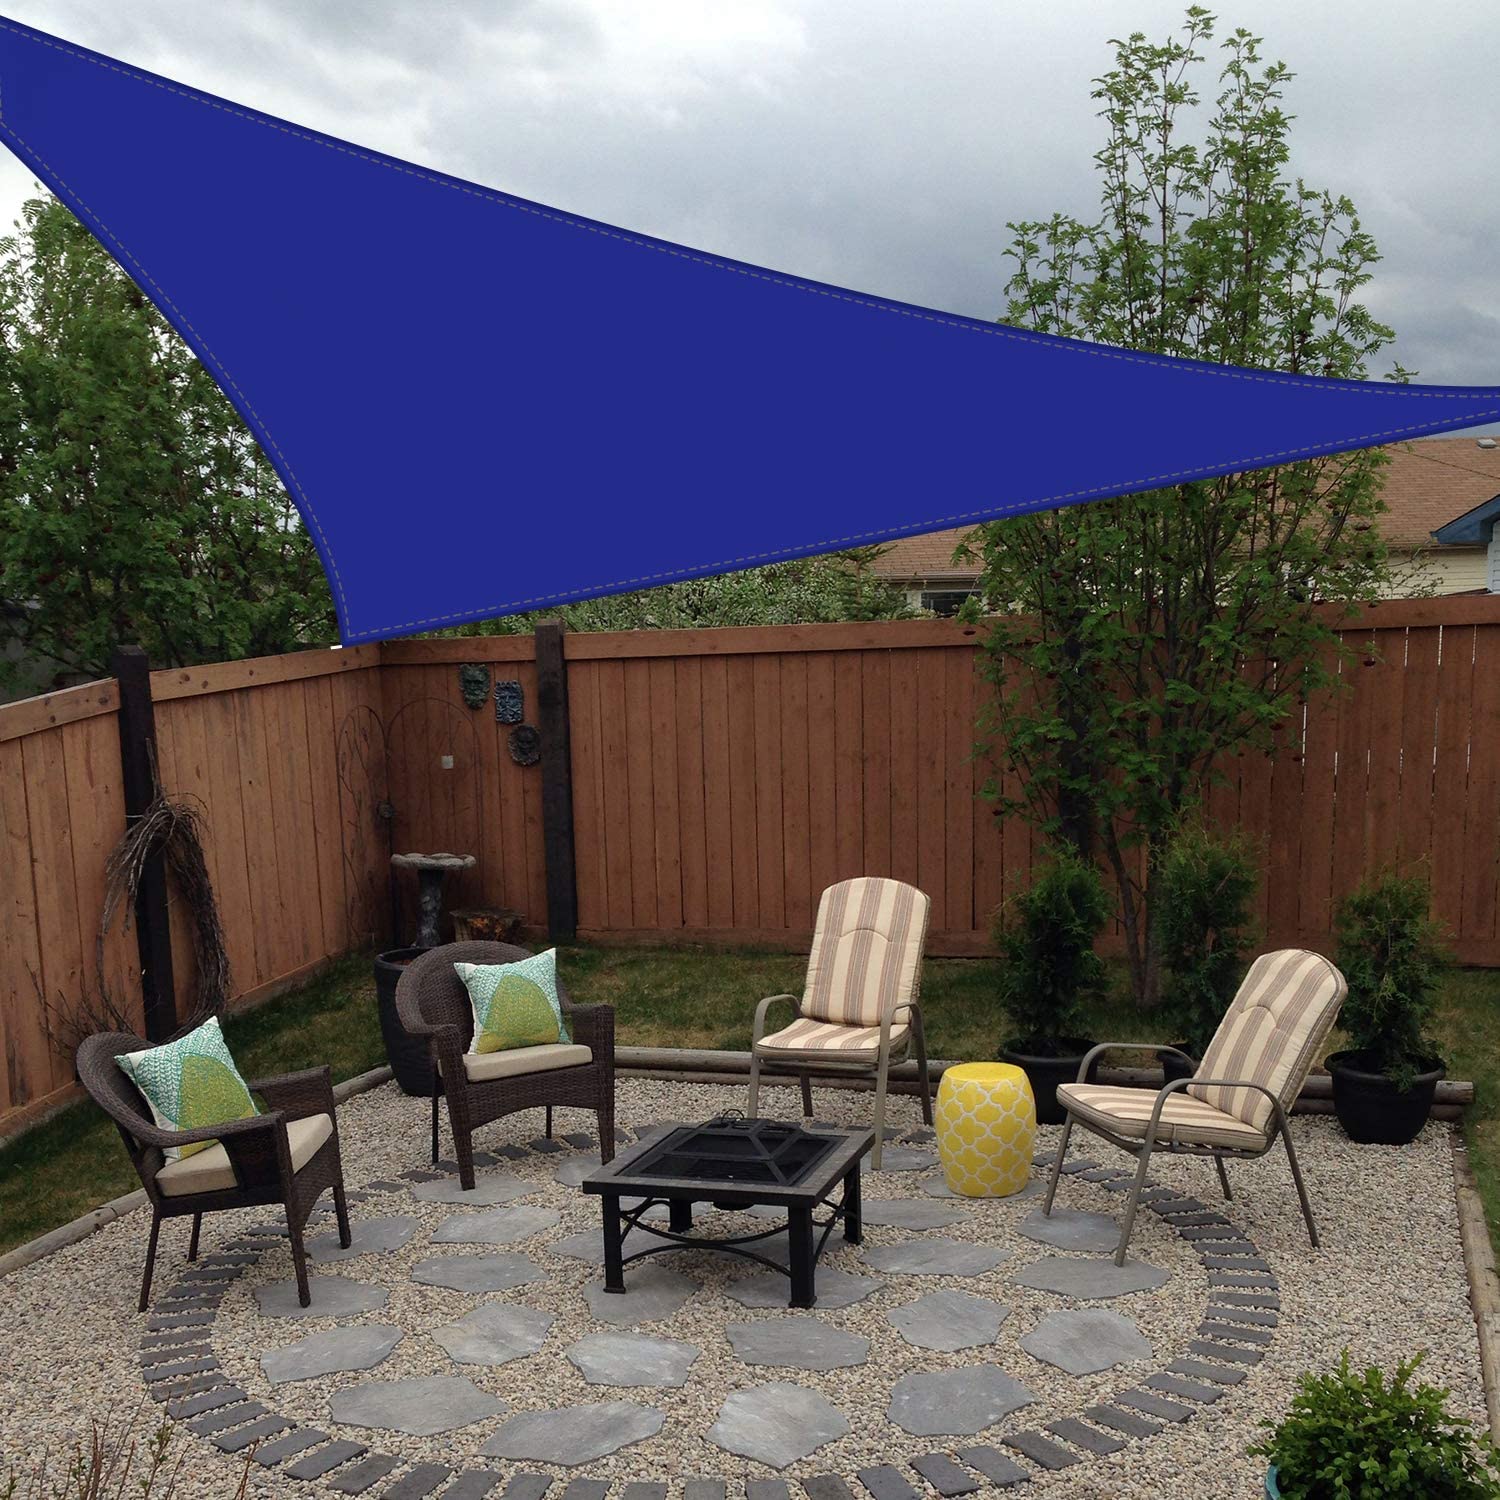 Opaque Privacy Protection Outdoor Waterproof Sun Shade Sail Canopy Triangle UV Block for Patio KGORGE Store